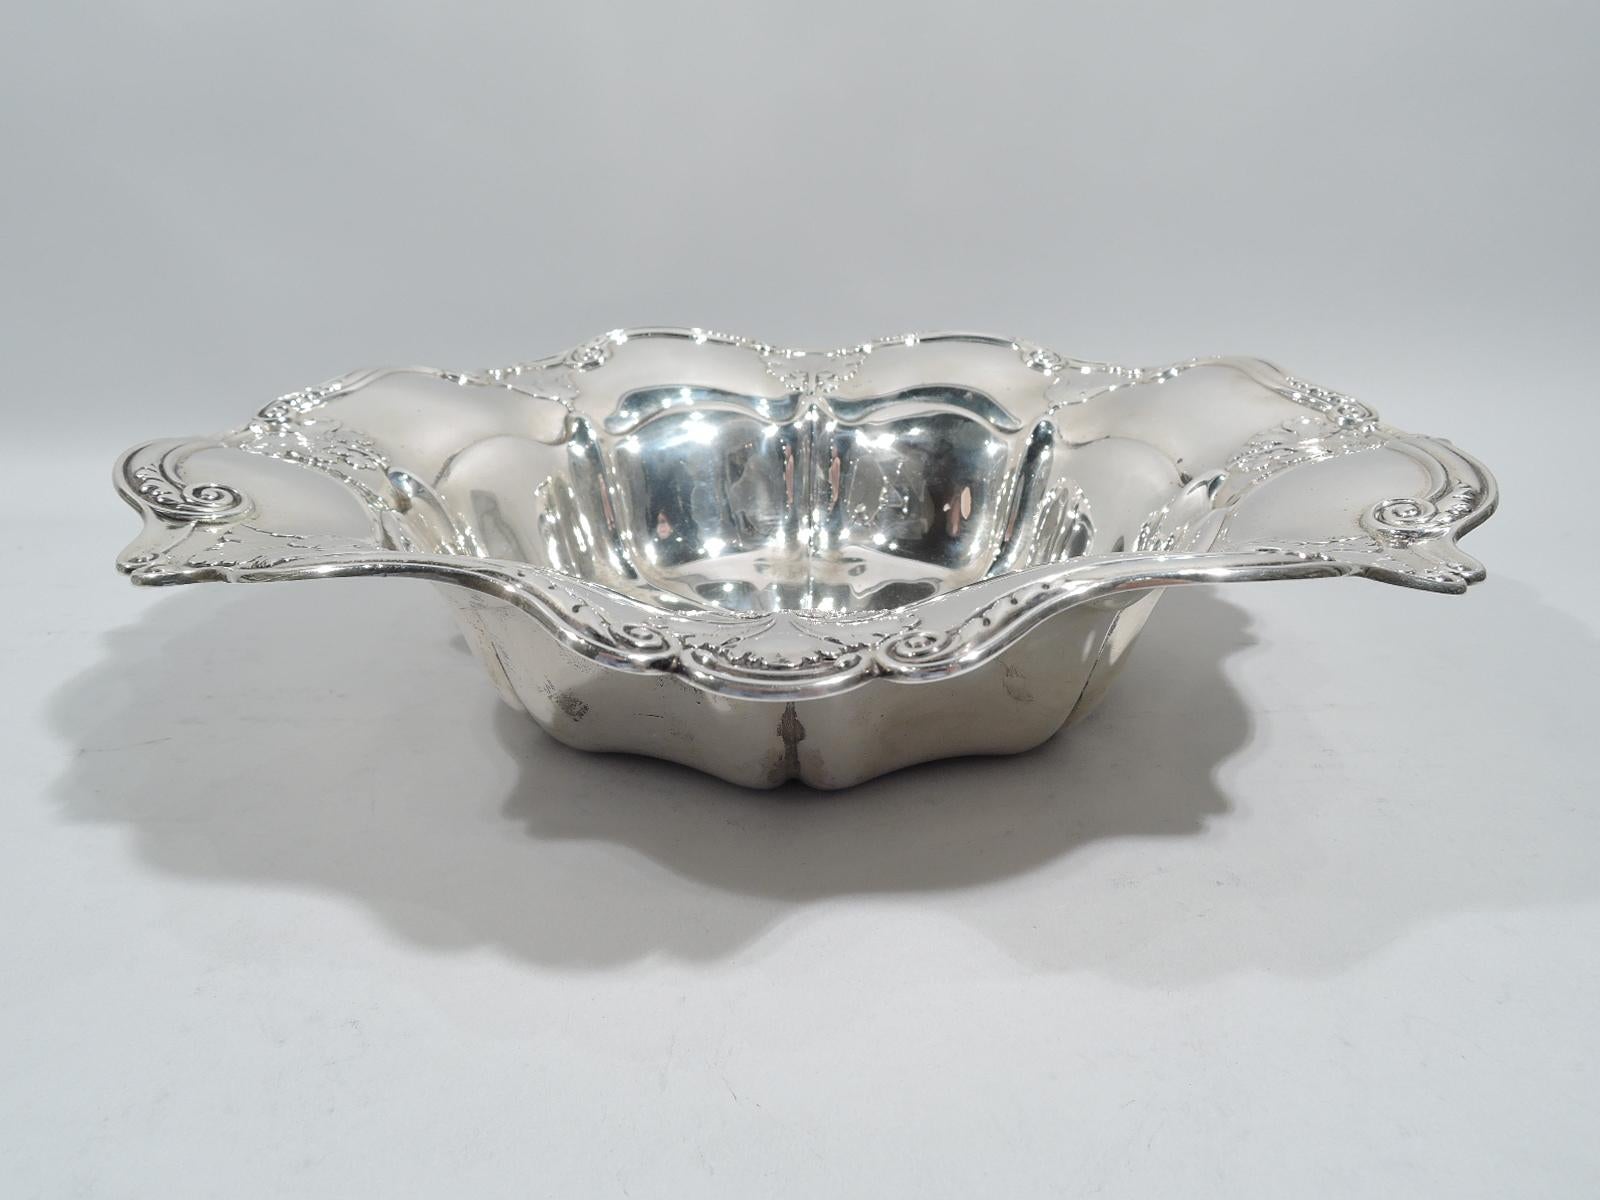 Turn-of-the-century Edwardian classical sterling silver bowl. Made by Gorham in Providence. Round with lobed and concave sides. Wavy shoulder with applied leaves and flowers, and scrolled rim. Well center engraved with interlaced script monogram.